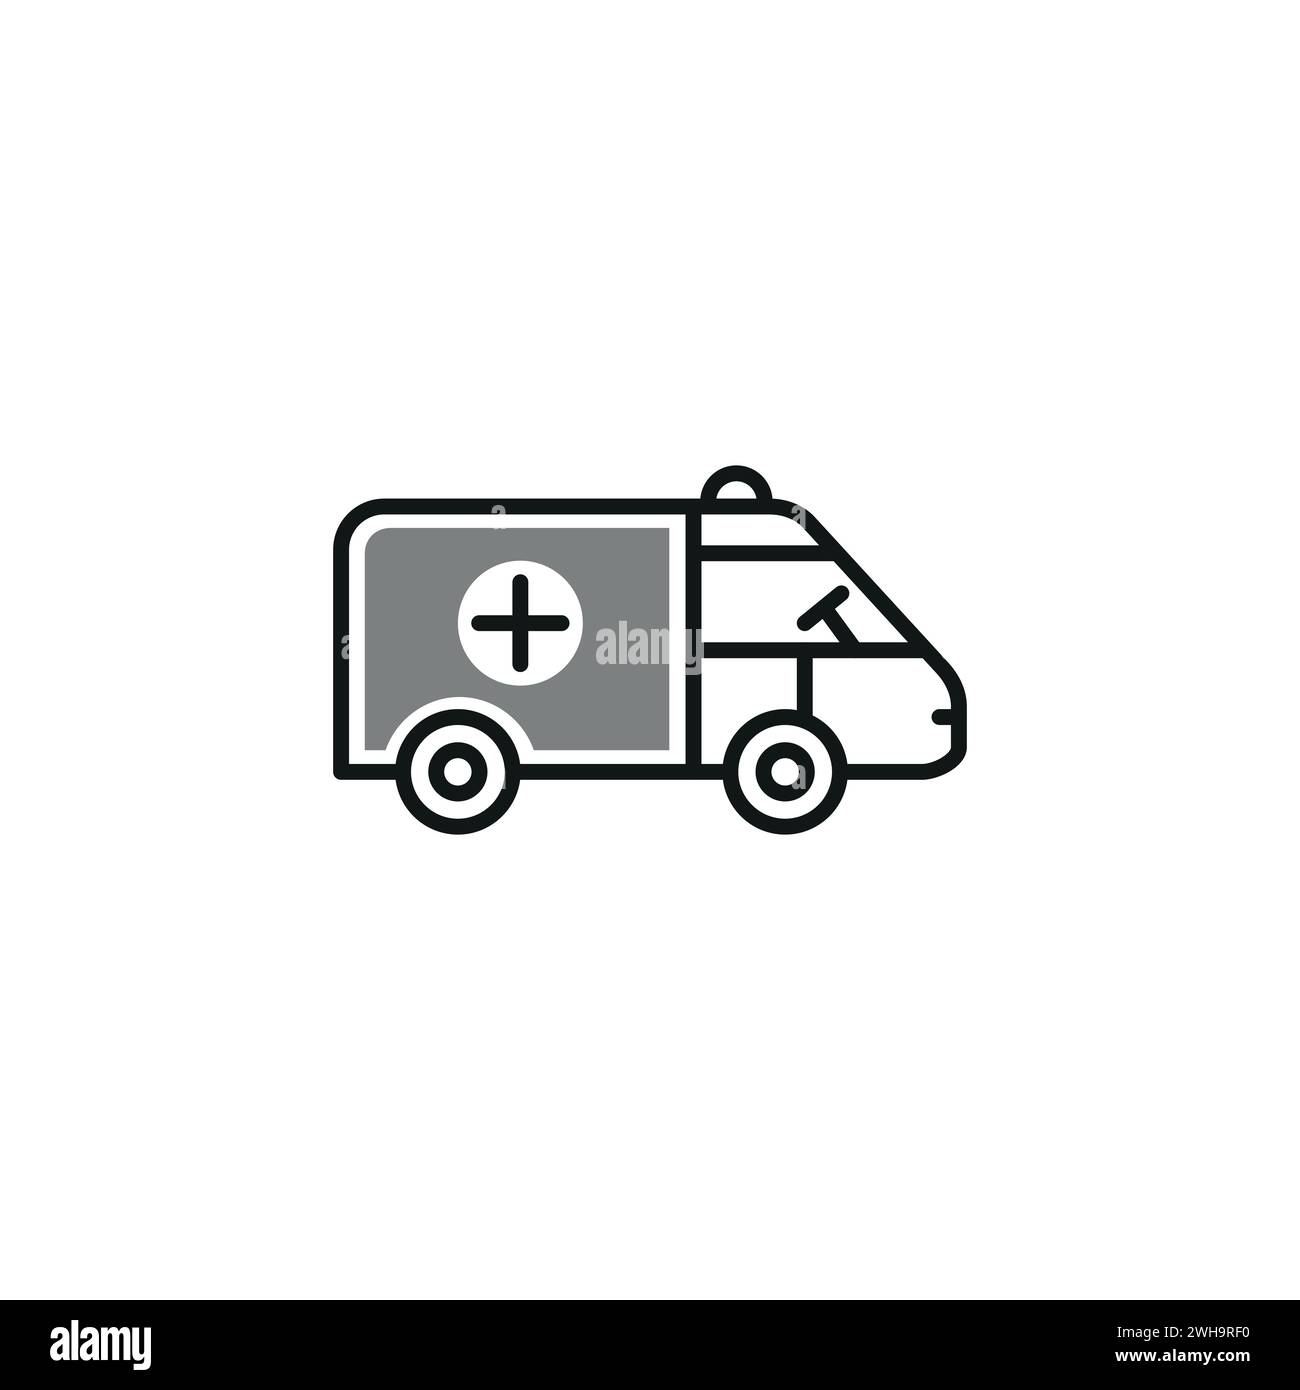 Medical health care icons objects used in hospitals and medical shops, men, women, medical icons Stock Vector